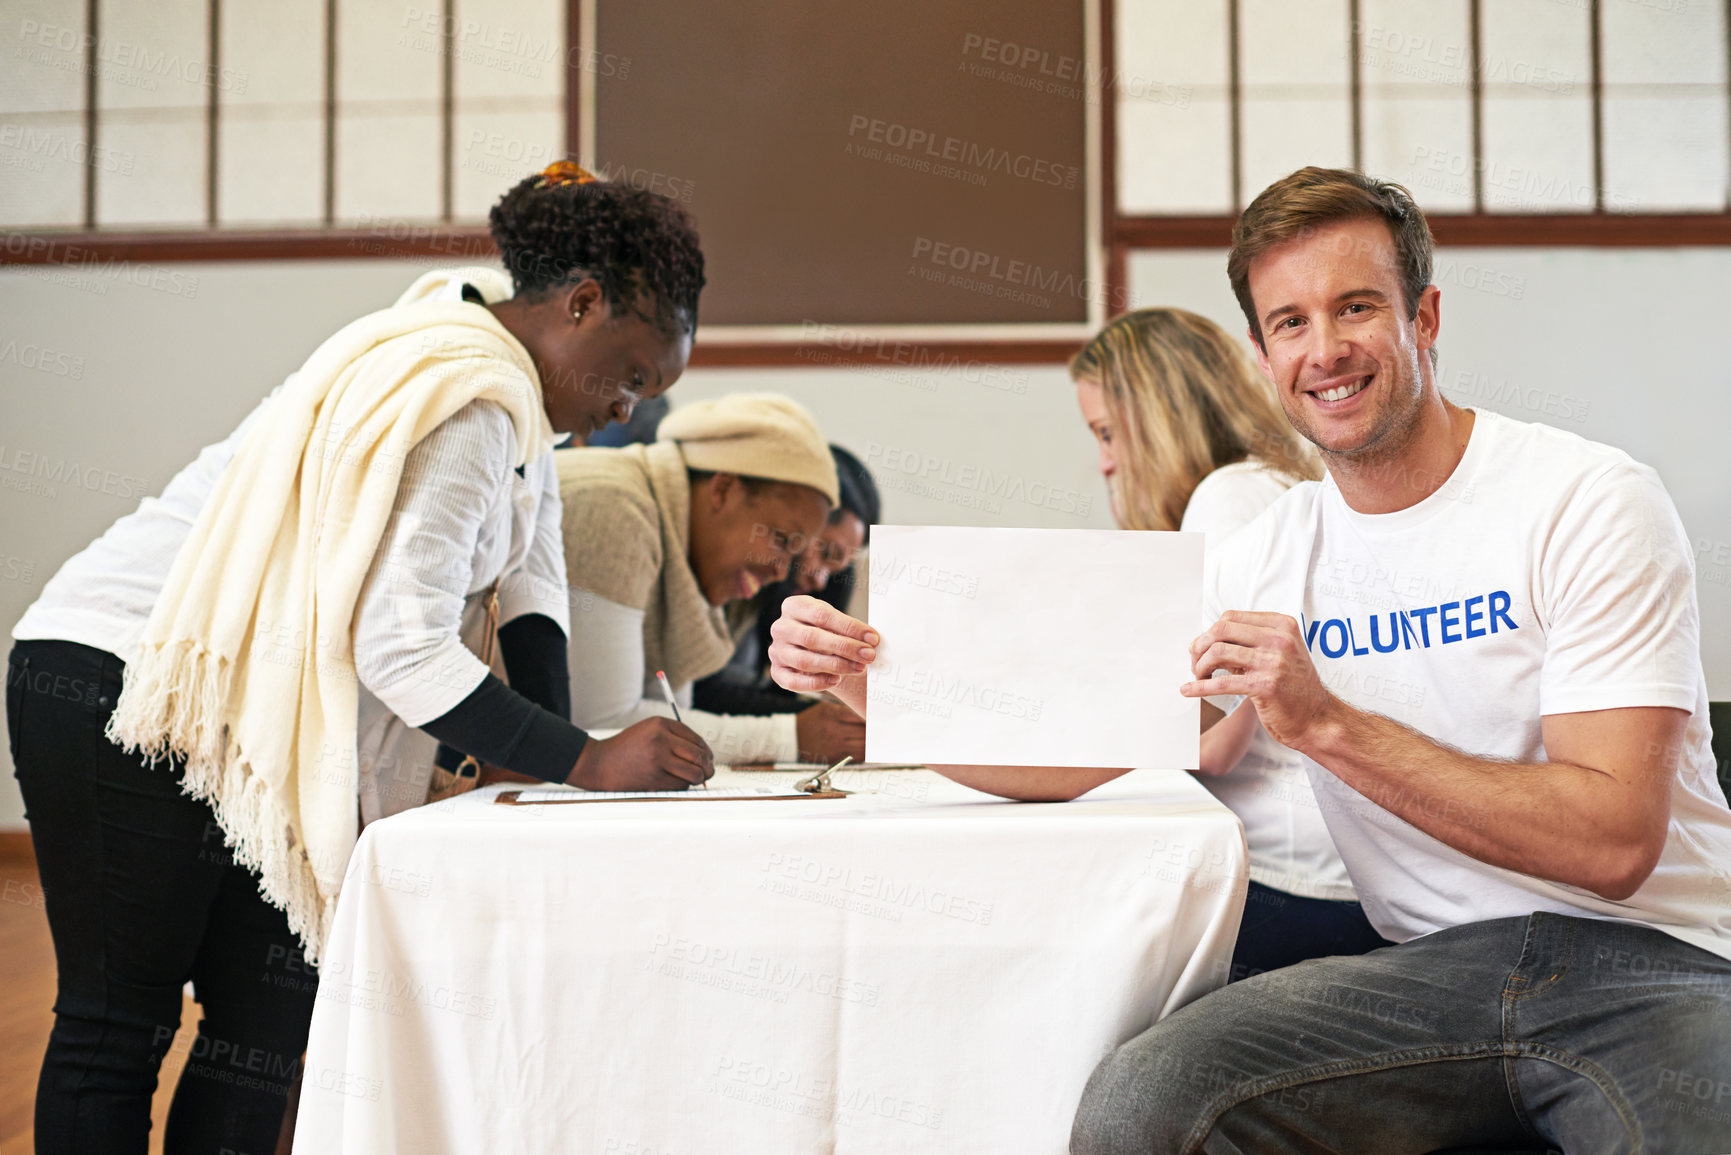 Buy stock photo Cropped portrait of a volunteer holding an empty sign while volunteers get signatures in the background